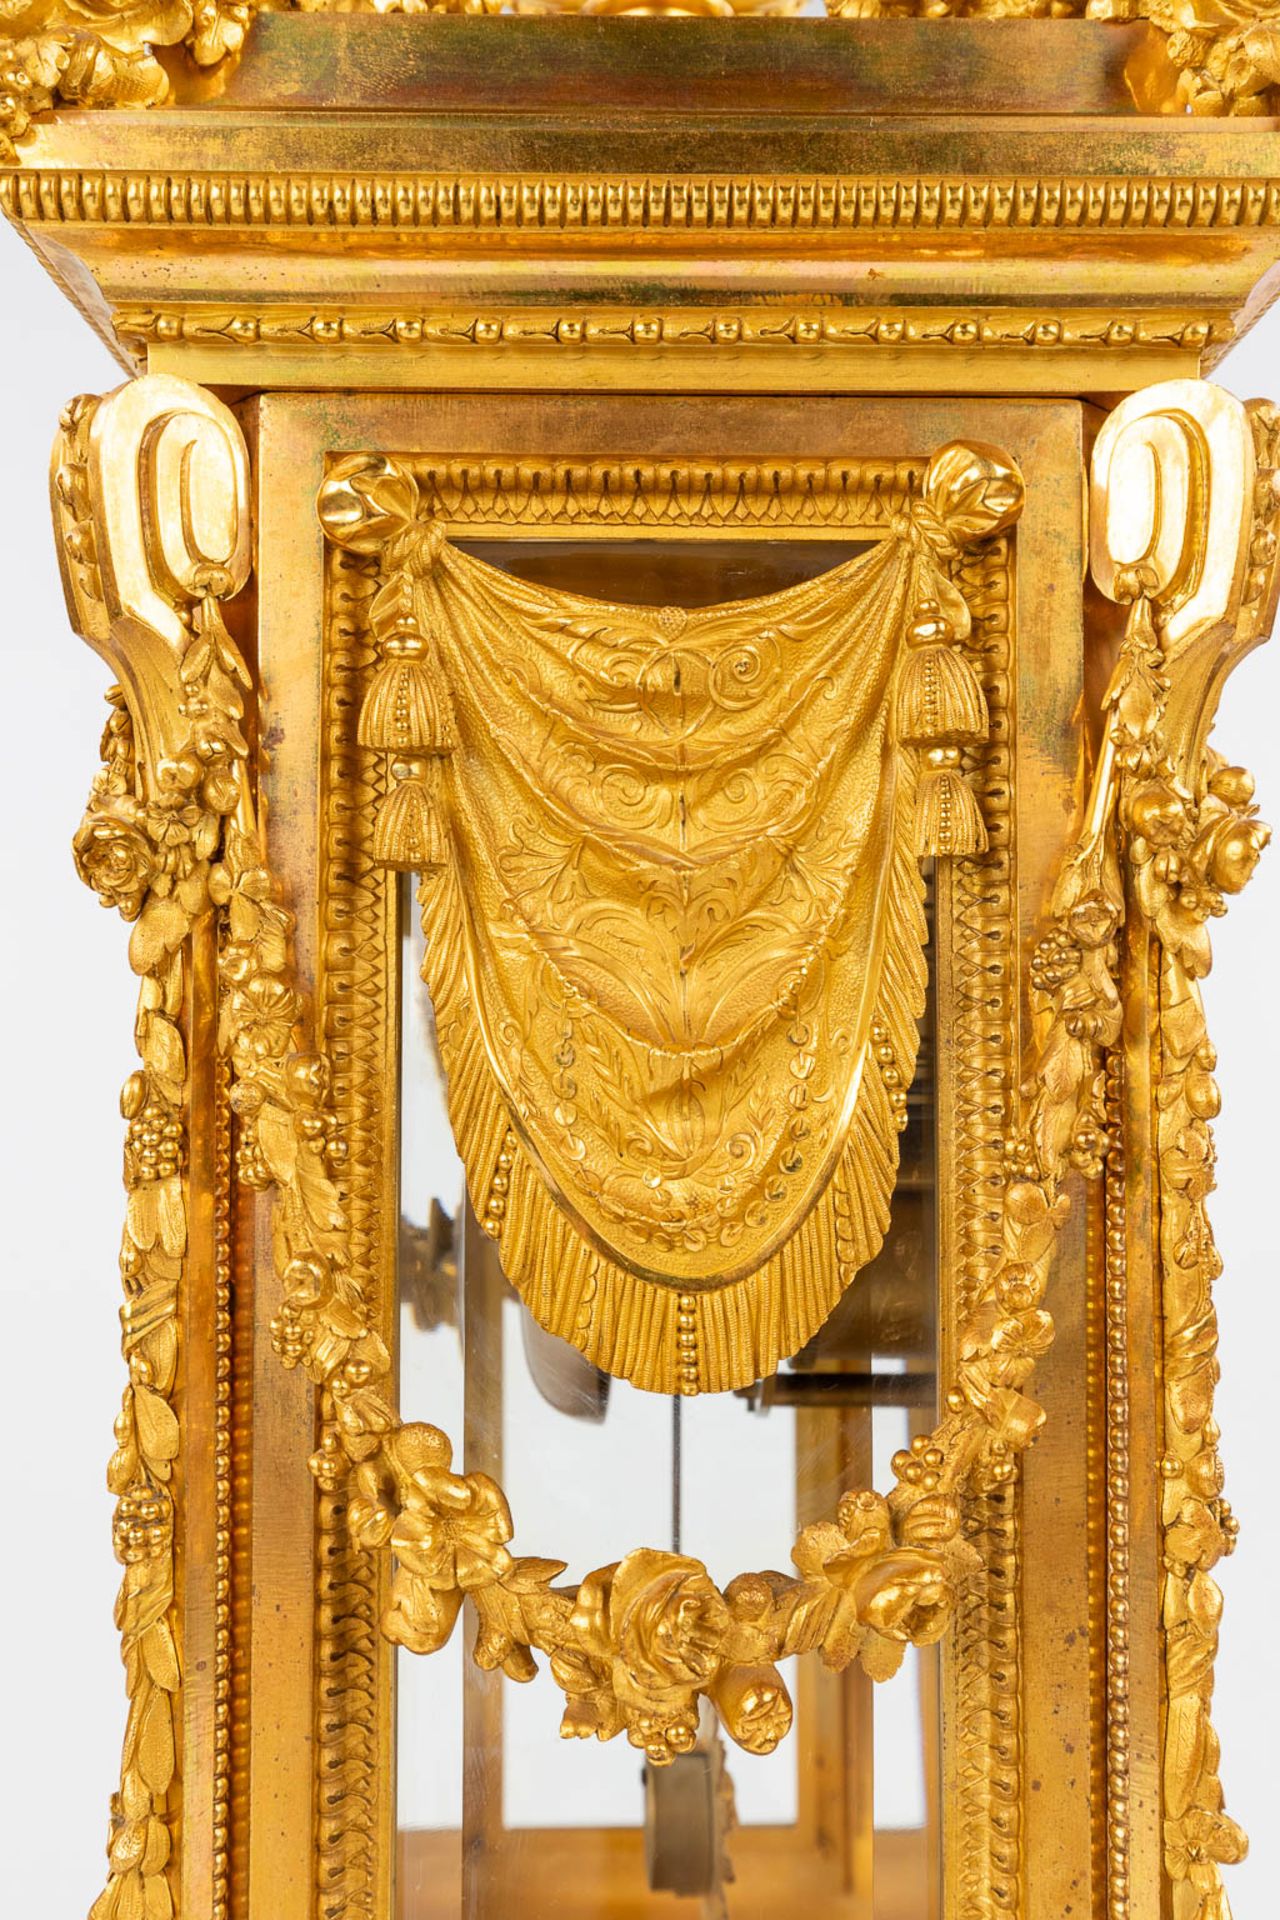 An imposing three-piece mantle garniture clock and candelabra, gilt bronze in Louis XVI style. Maiso - Image 11 of 38